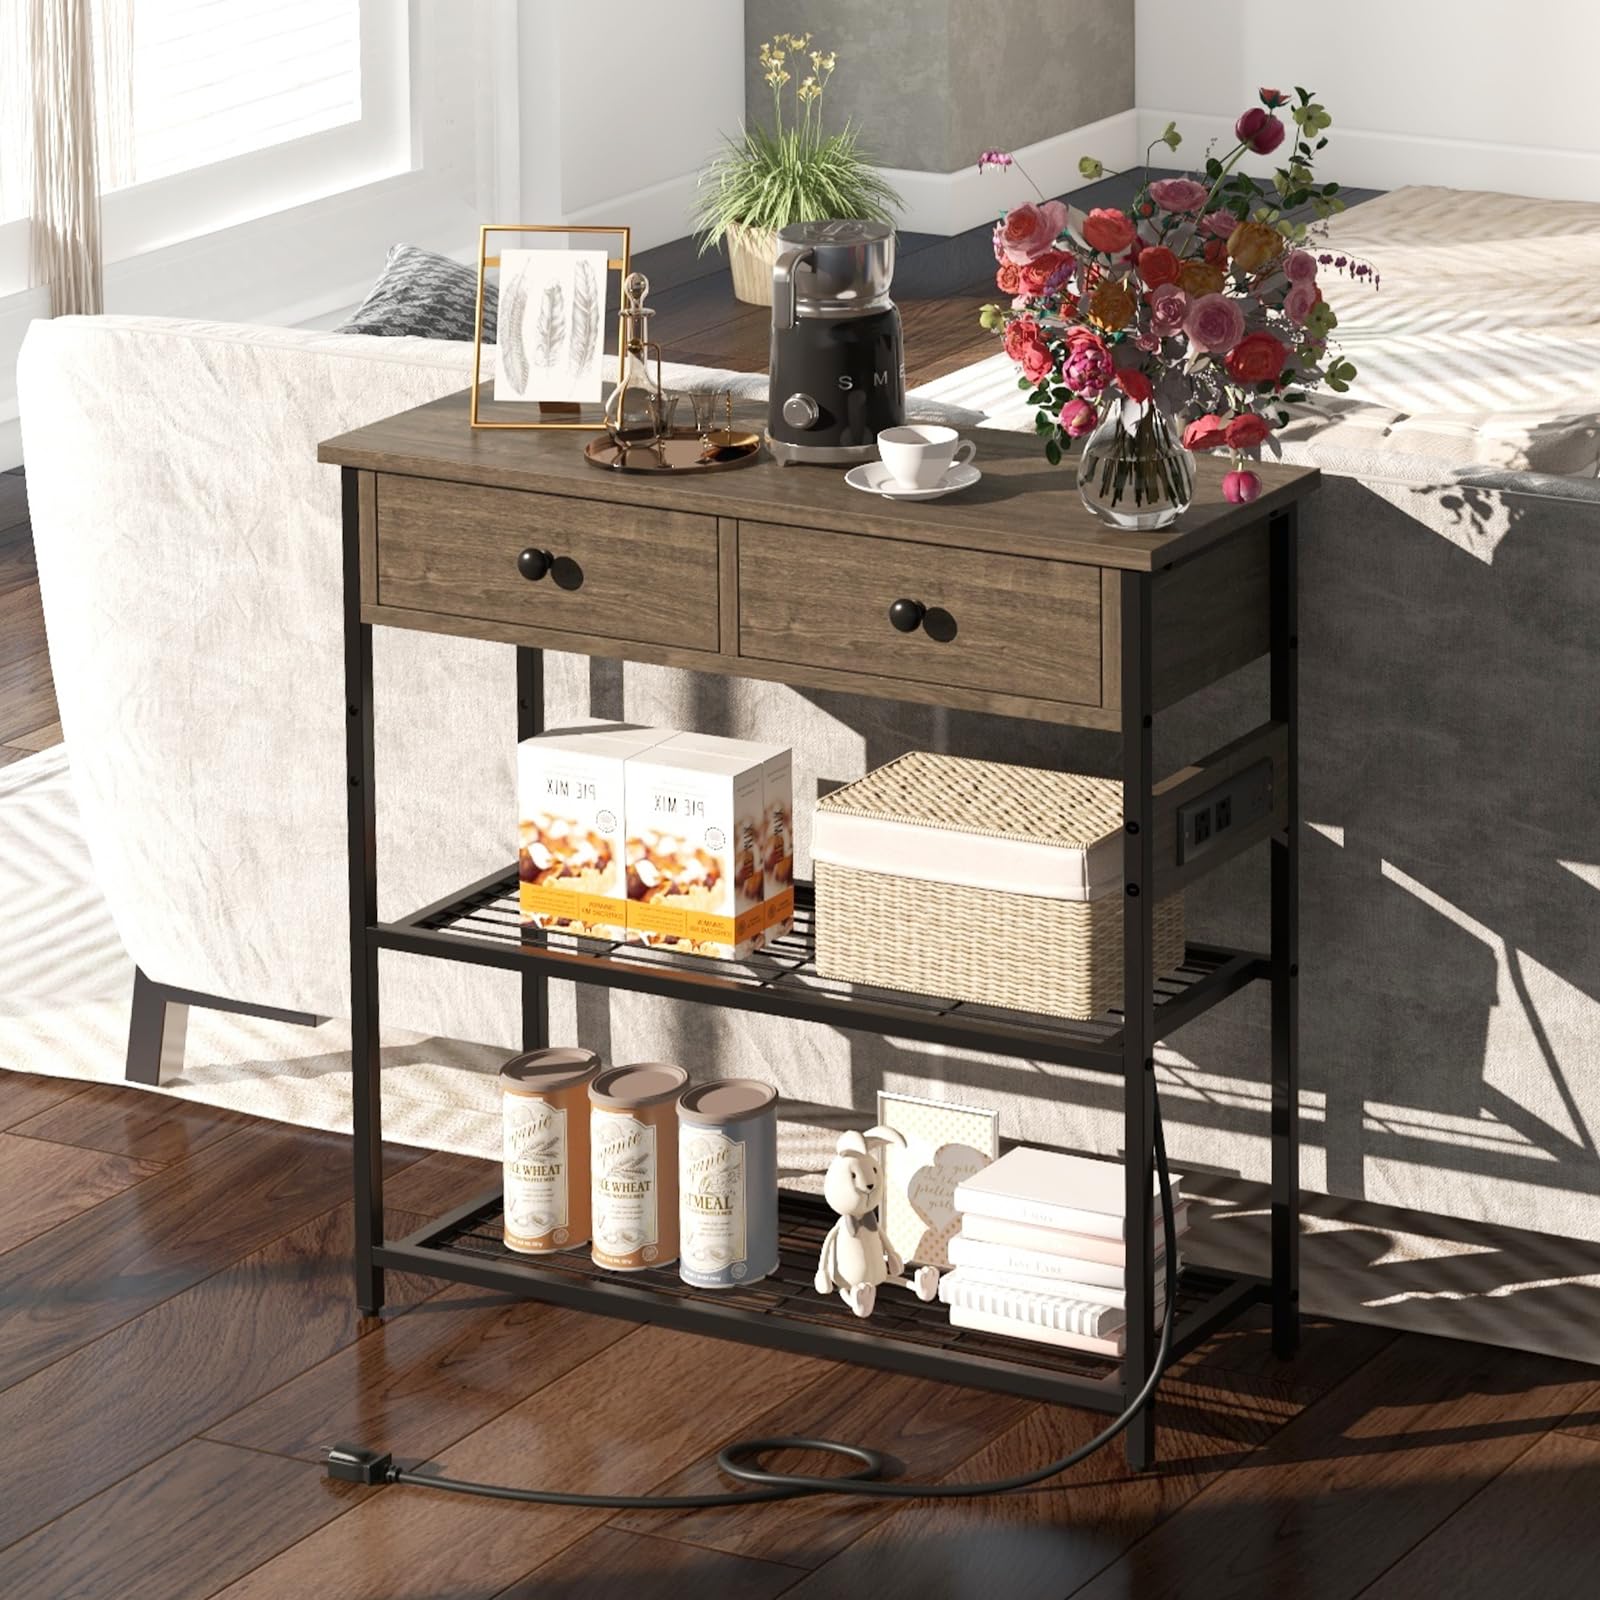 Giantex Console Table with Outlets - 3-Tier Entryway Table w/USB Ports, 2 Storage Drawers